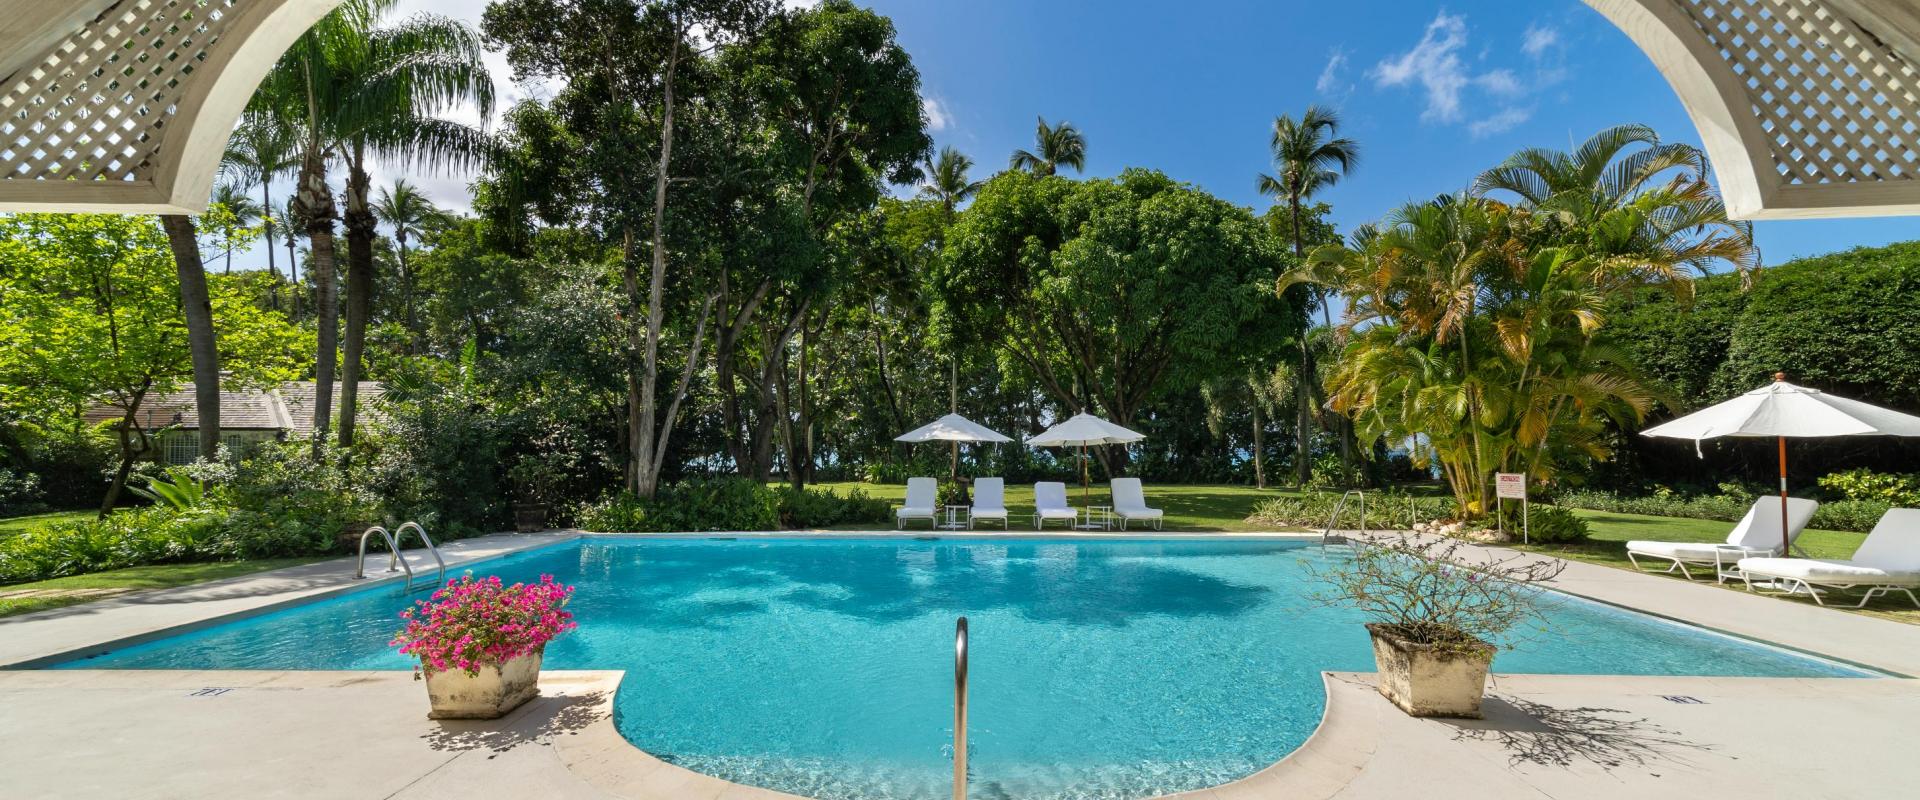 Heronetta Sandy Lane Estate Barbados View of Pool and Gardens from Pool House